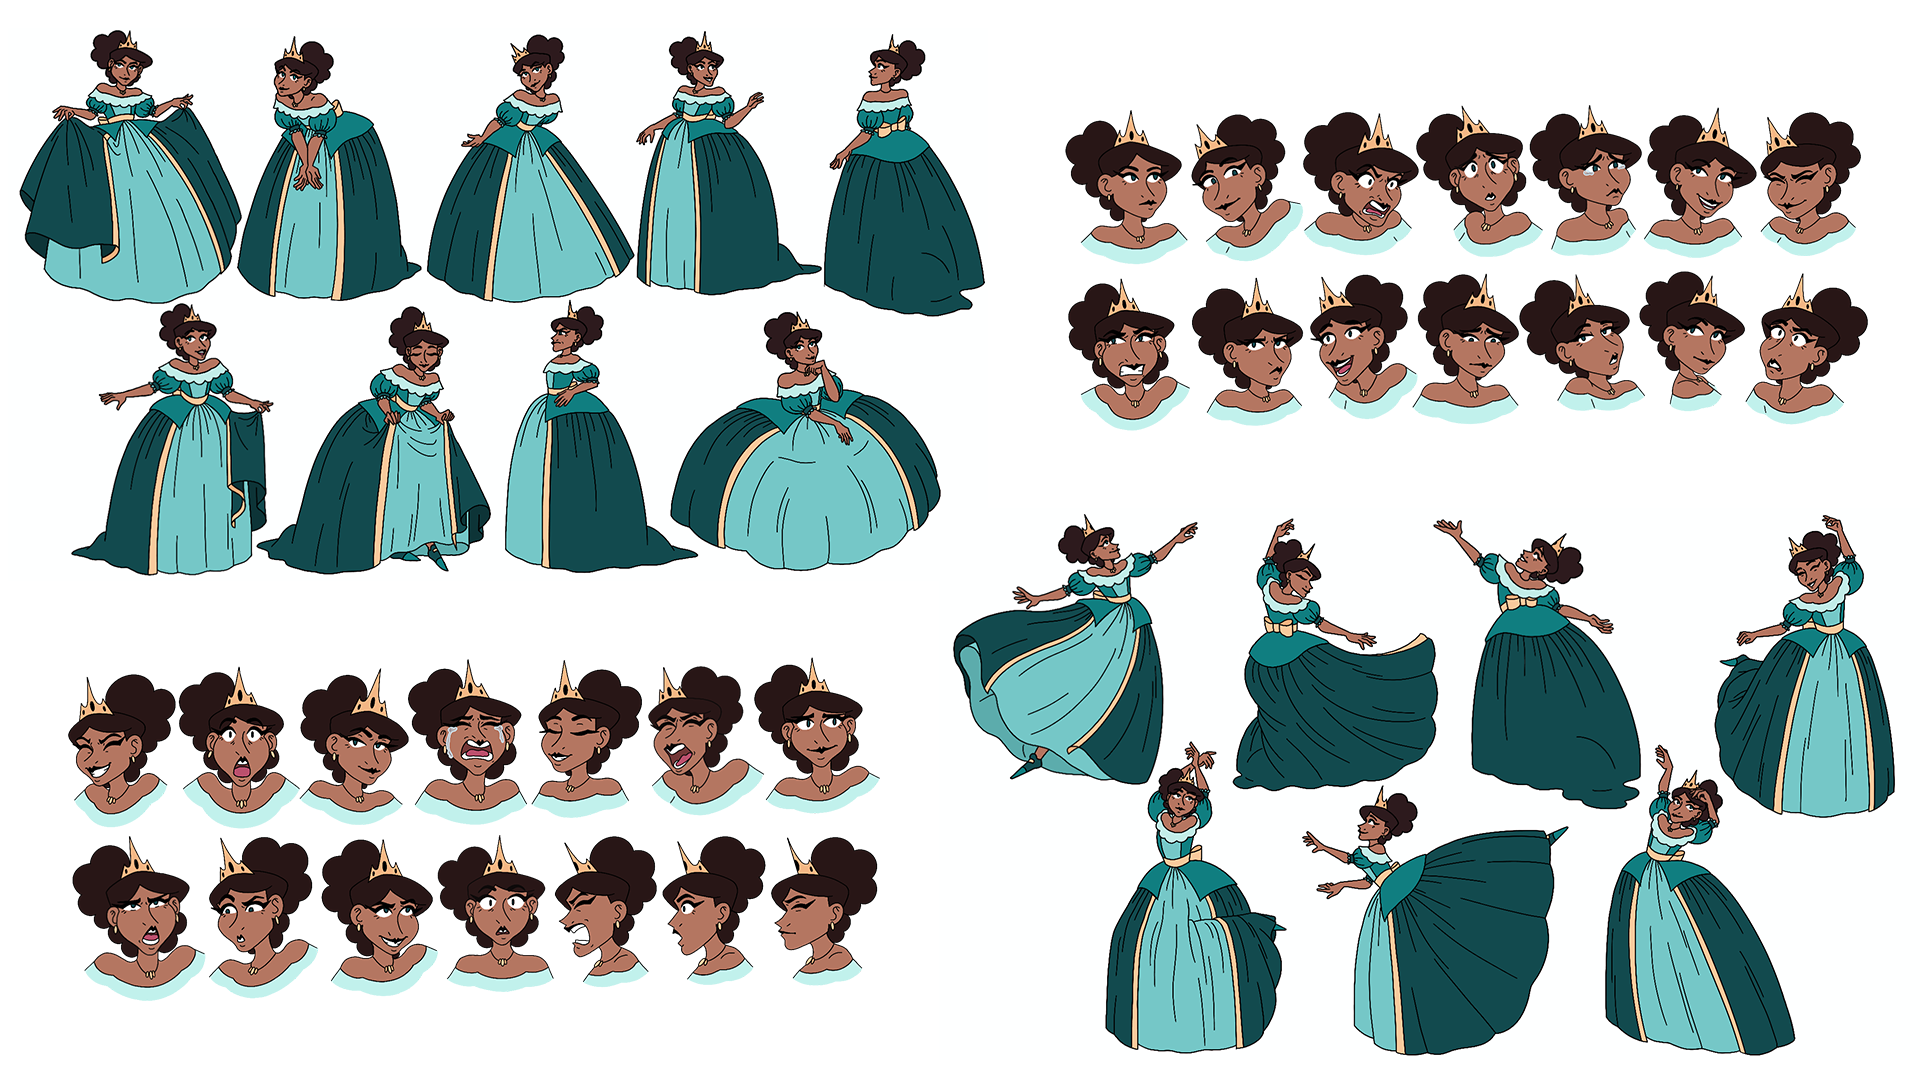 Character Design work by Georgia Davison for the short film "Dance Macabre". Showing the main character Edith doing basic gestures and dance poses, as well as a range of expressions from sadness to happiness.